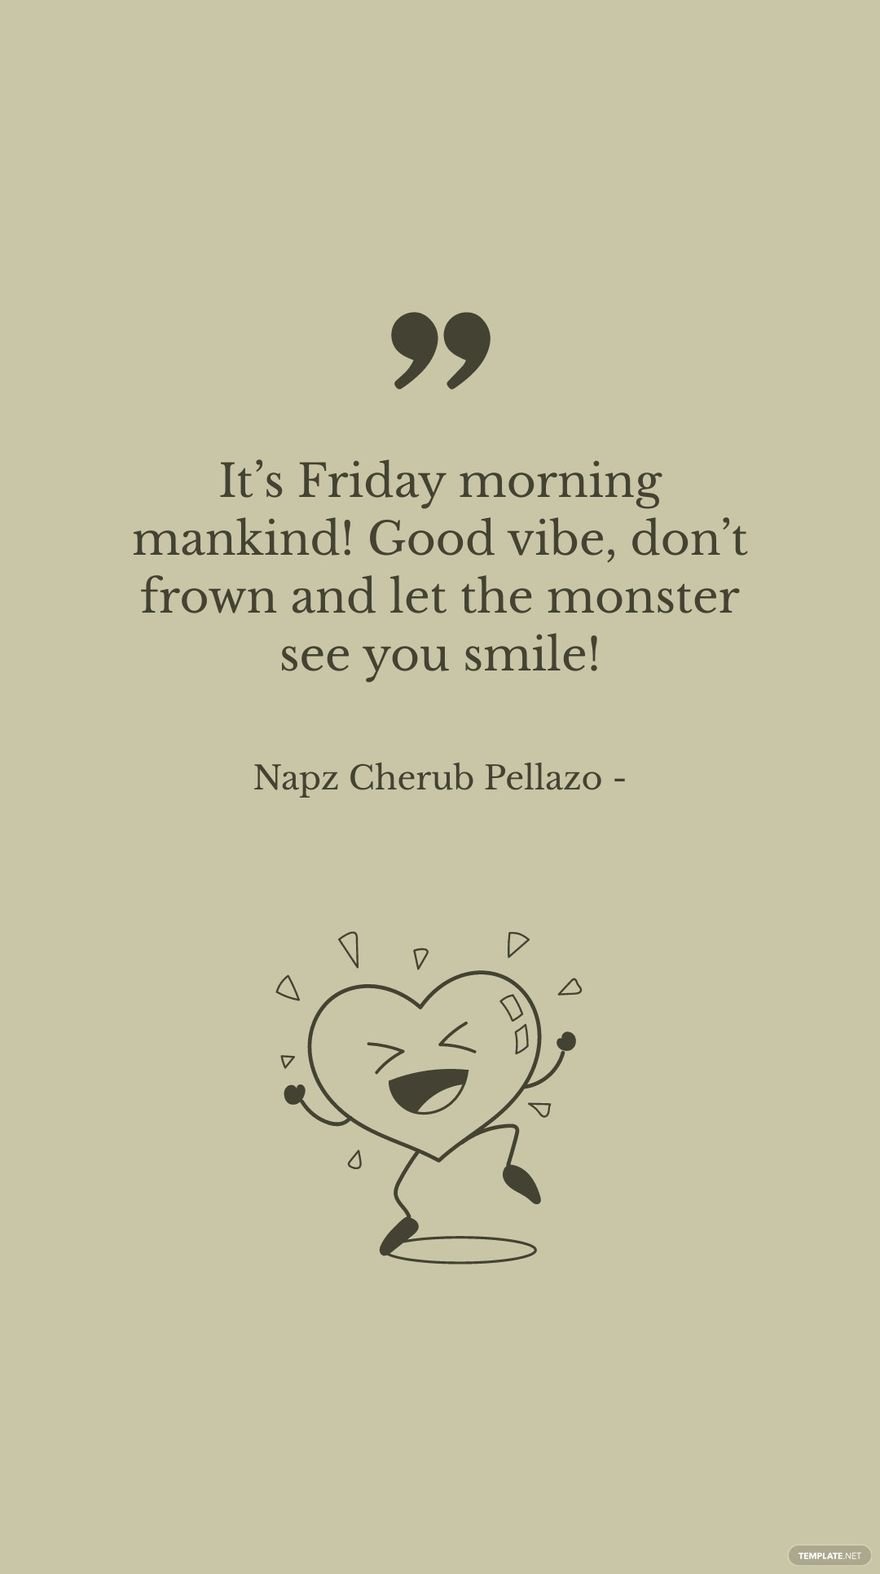 Napz Cherub Pellazo - It’s Friday morning mankind! Good vibe, don’t frown and let the monster see you smile!